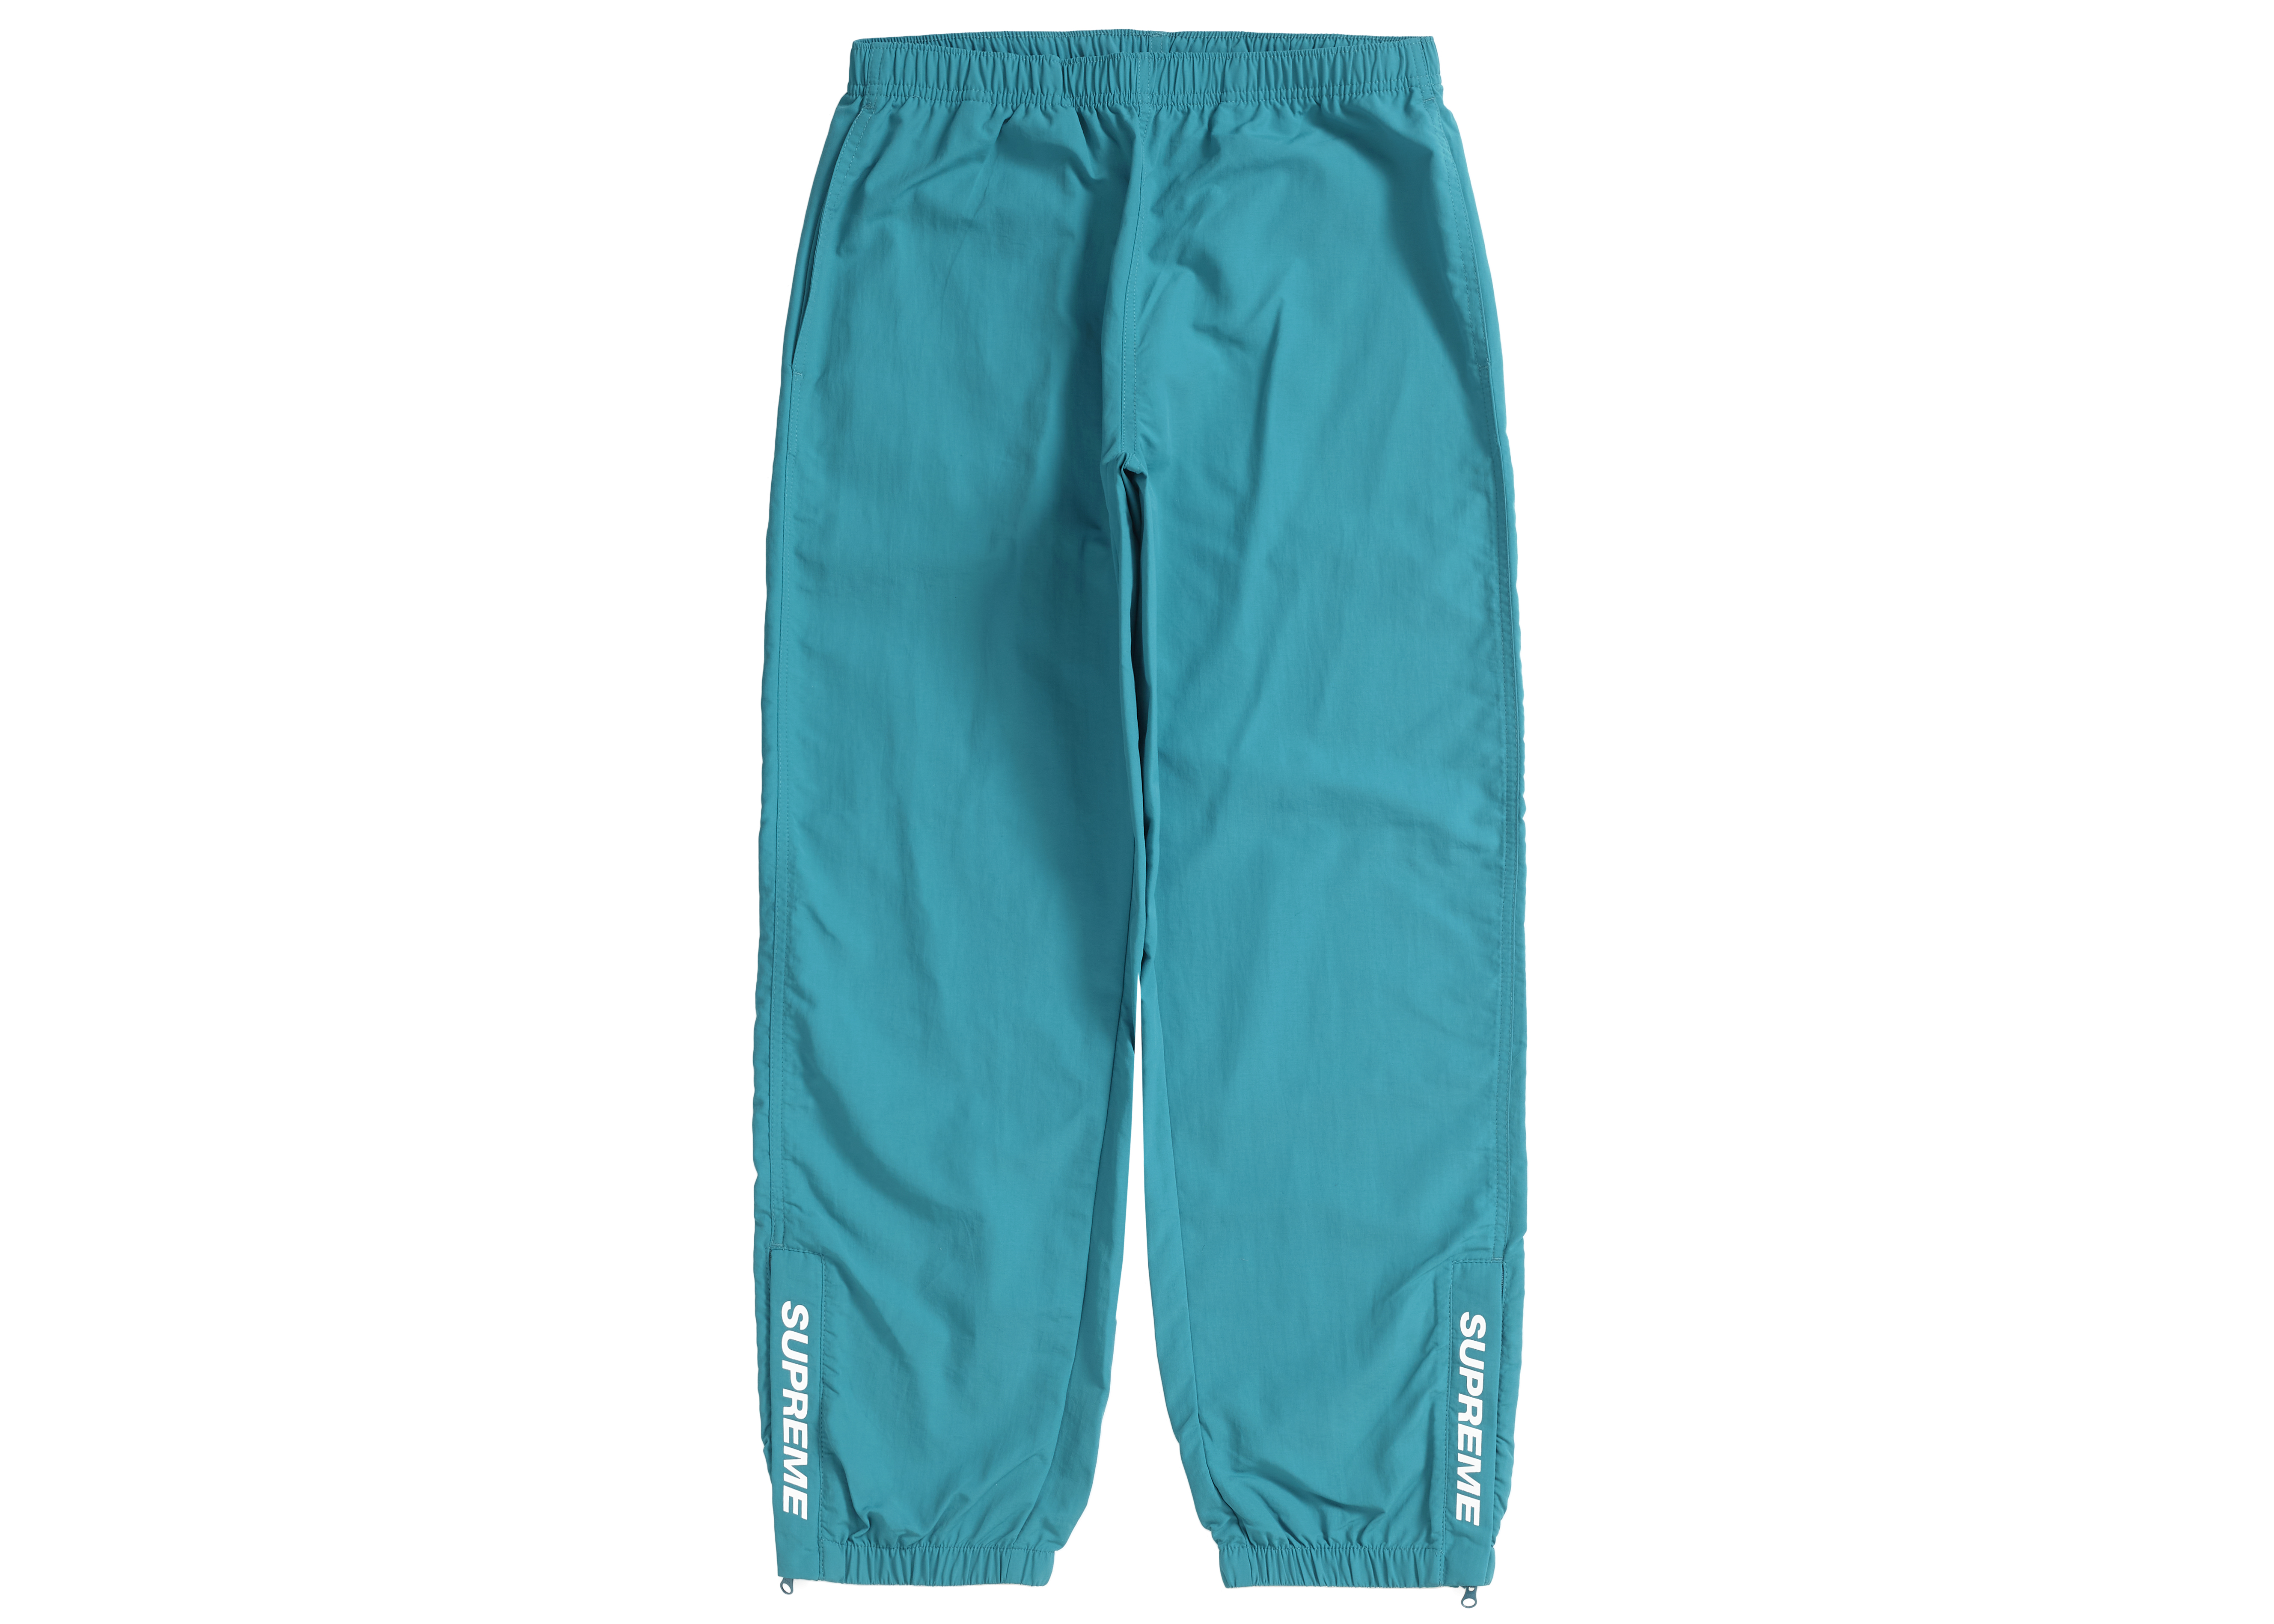 Supreme Warm Up Pant Bright Teal Men's - SS21 - US